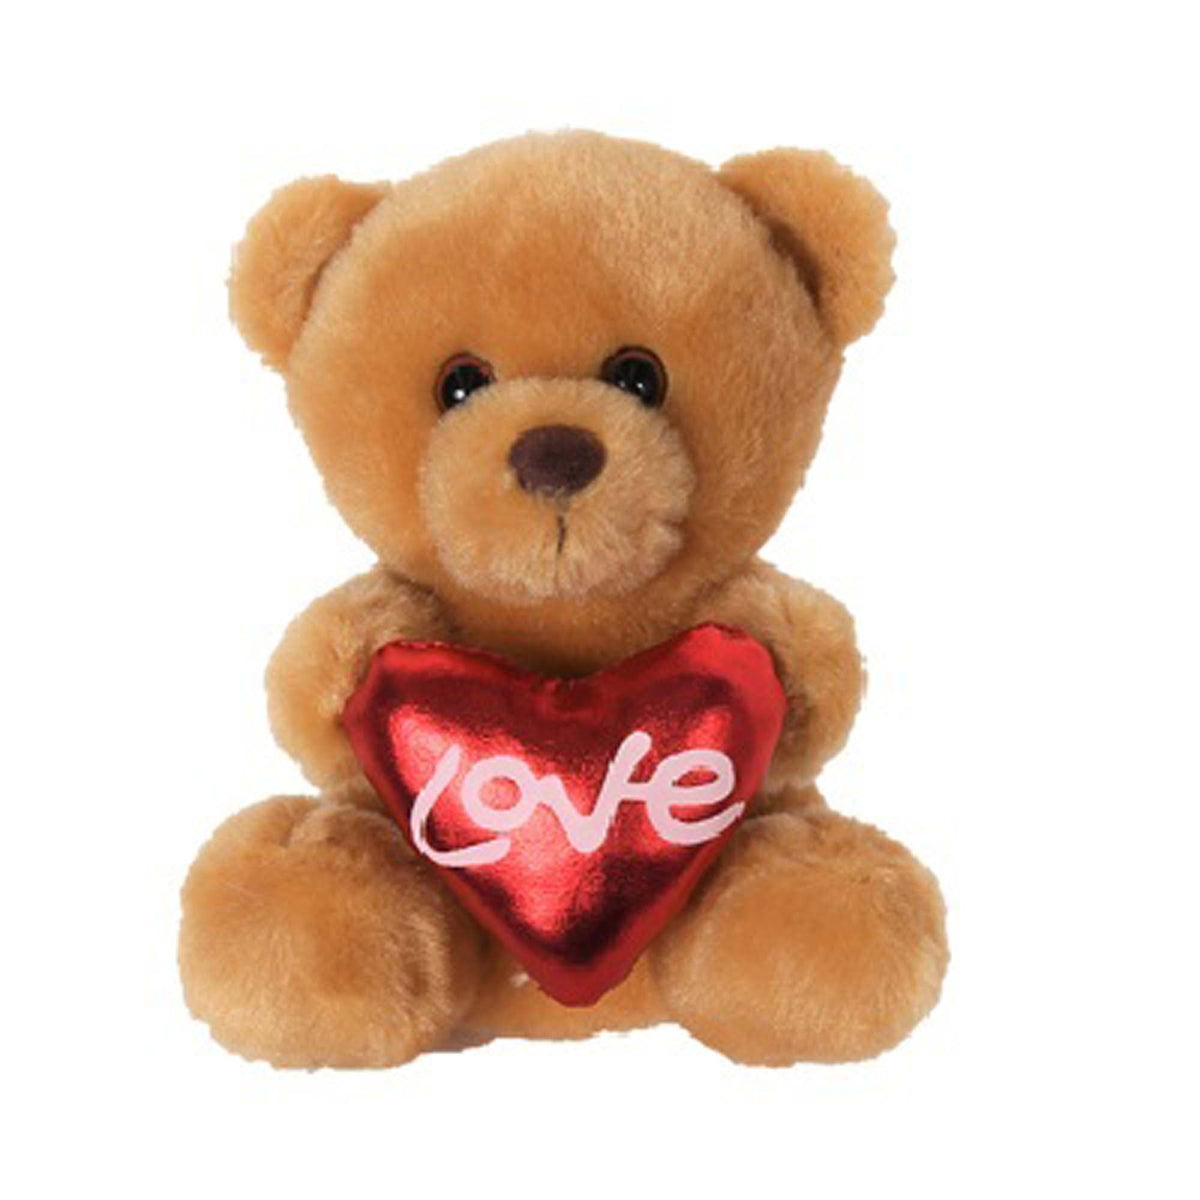 BB TOYMAKER Valentine's Day Brown Love Bear Plush, 5 Inches, 1 Count